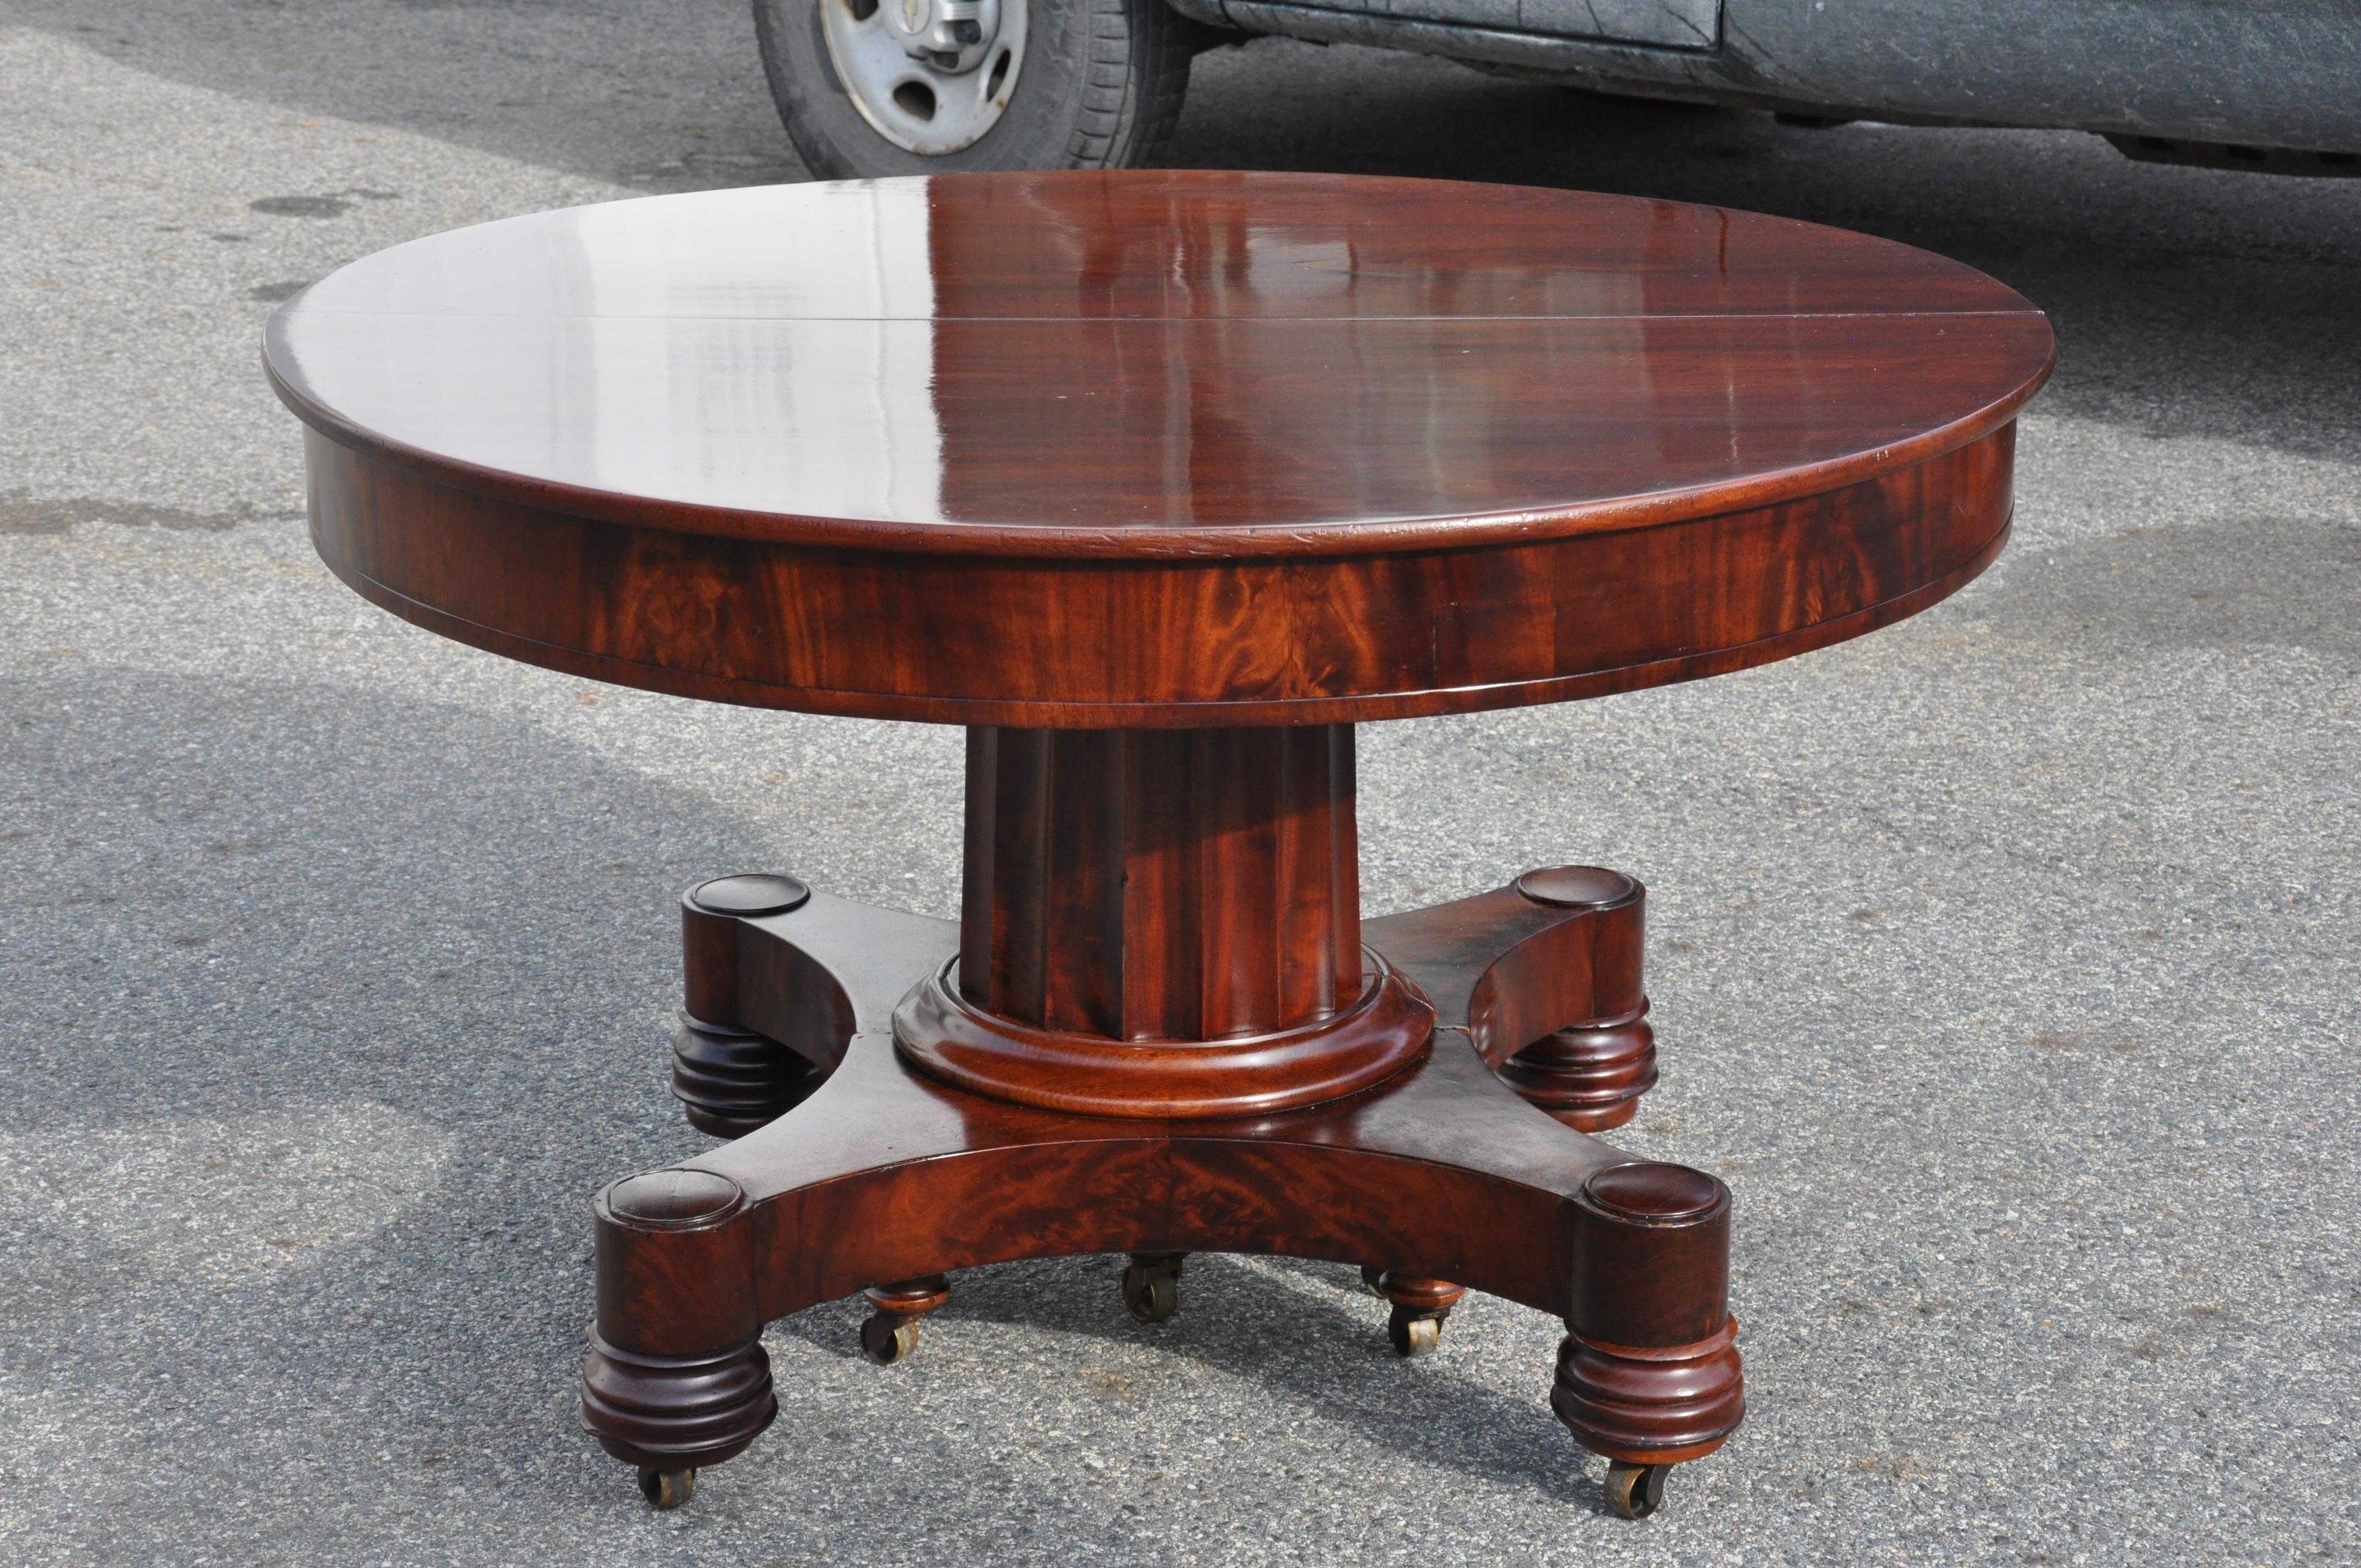 Mahogany 19th Century Boston Late Federal Round Expandable Dining Table by Briggs